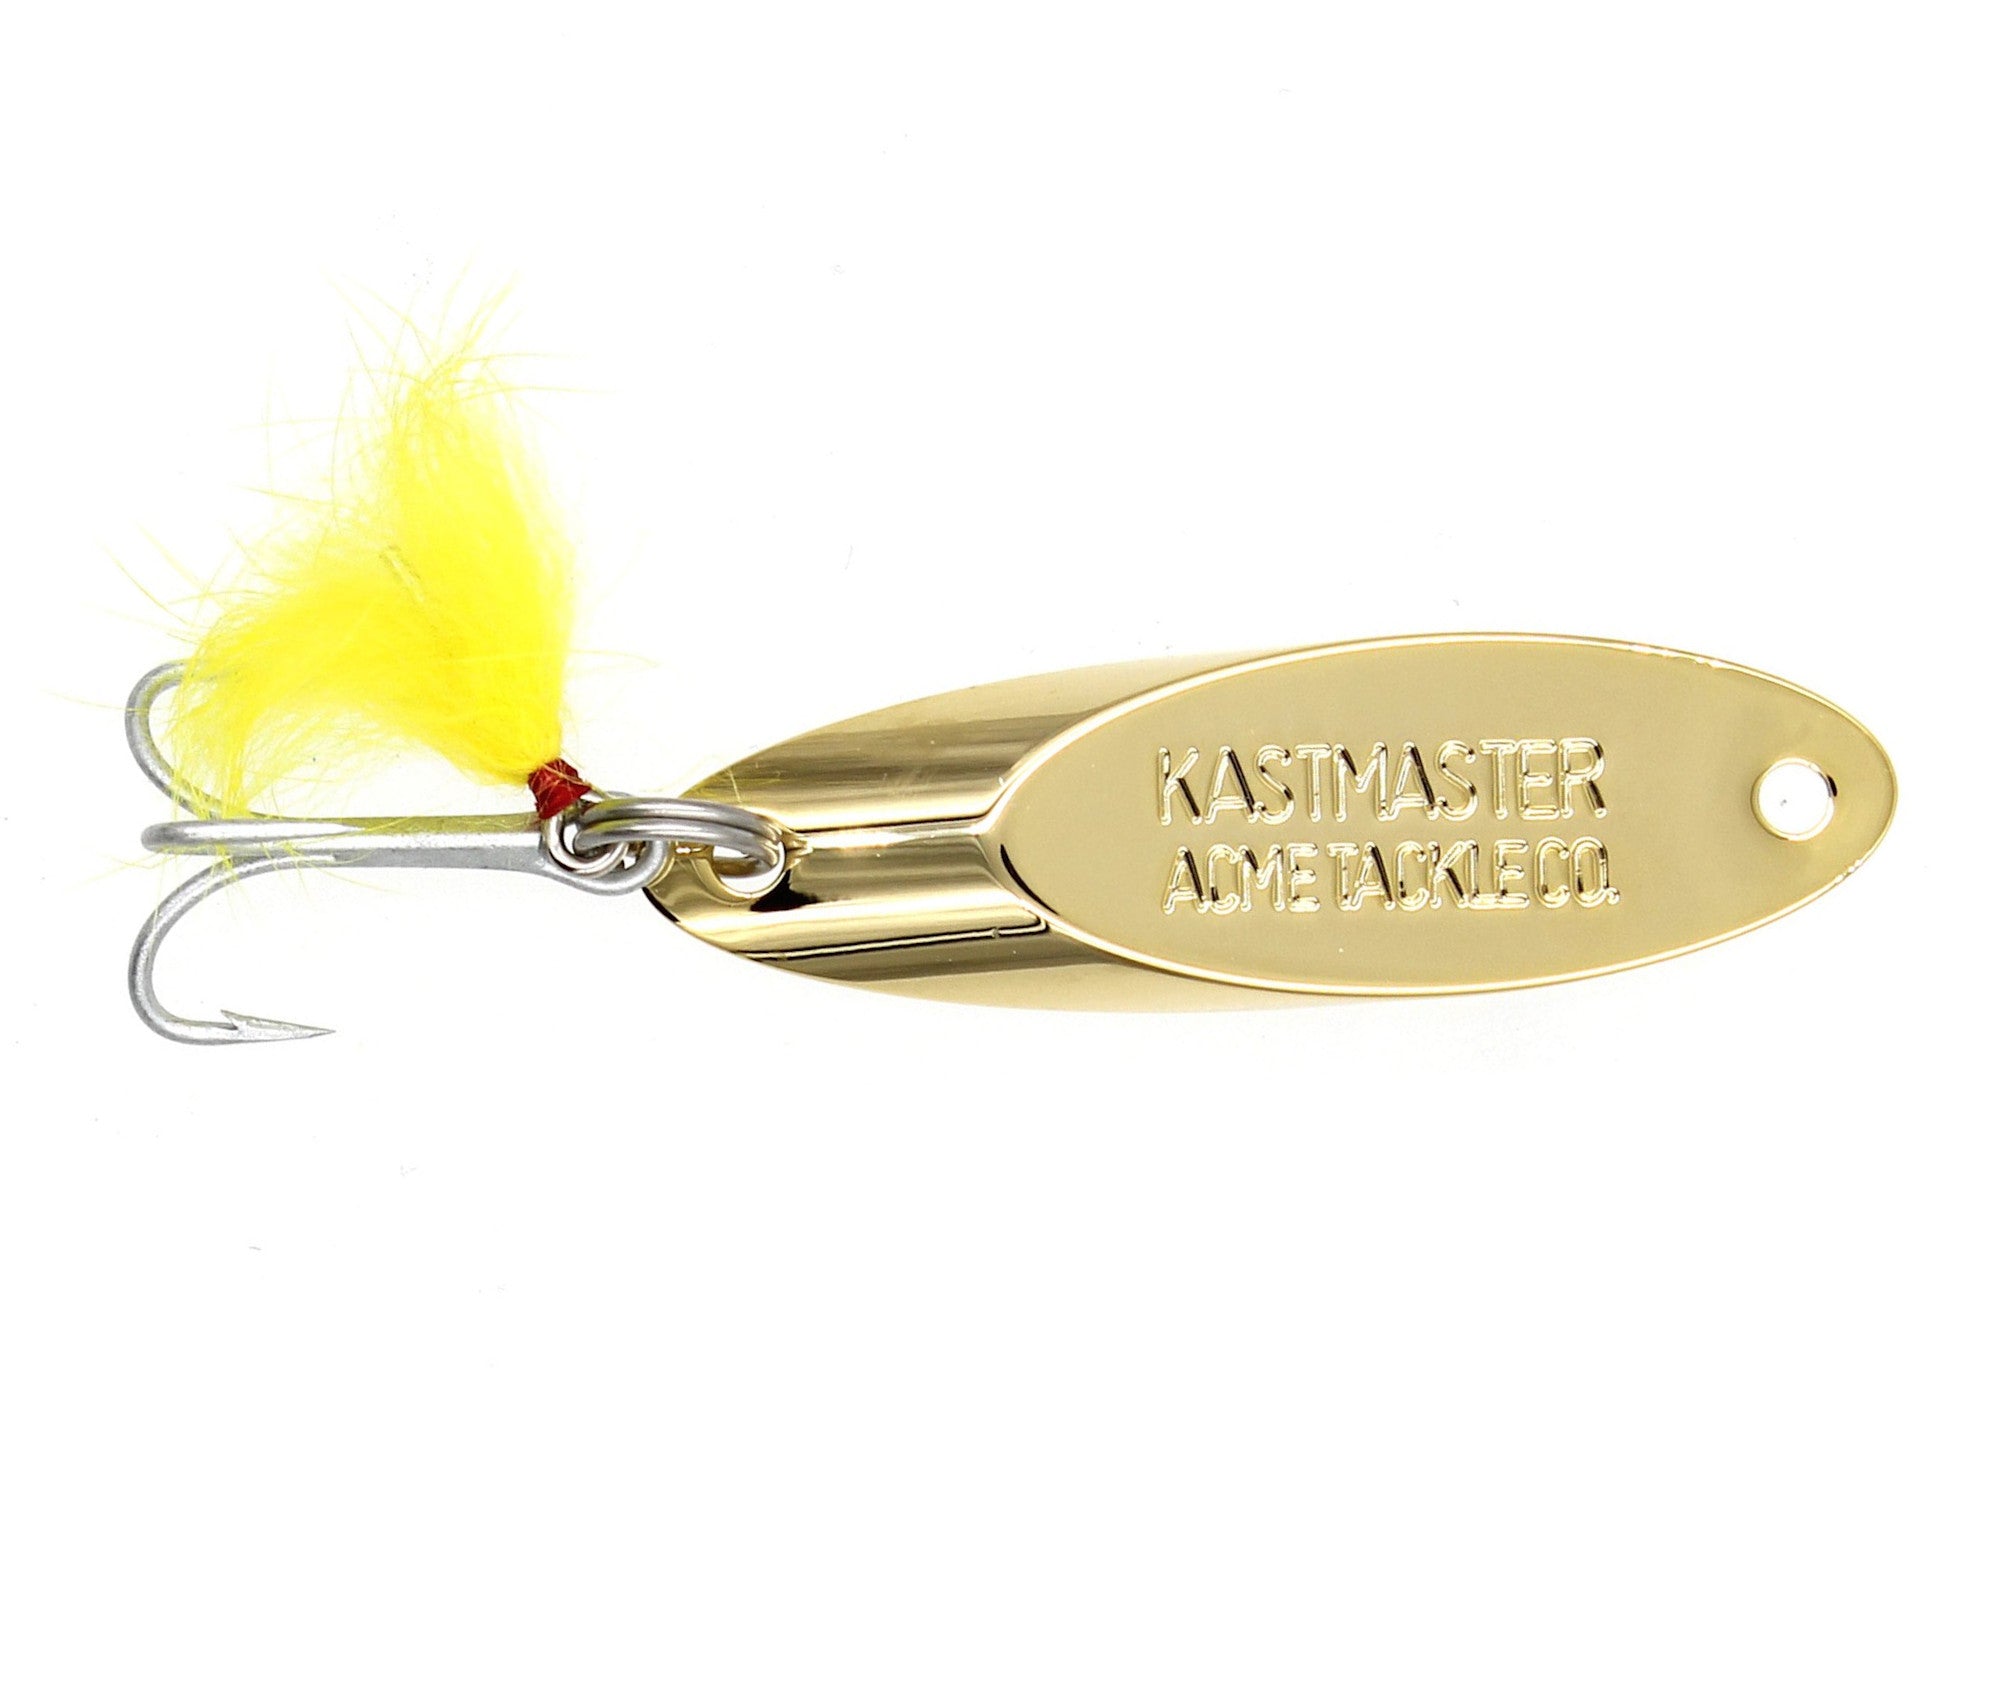 Acme Kastmaster Spoon 1/4 oz. — Discount Tackle